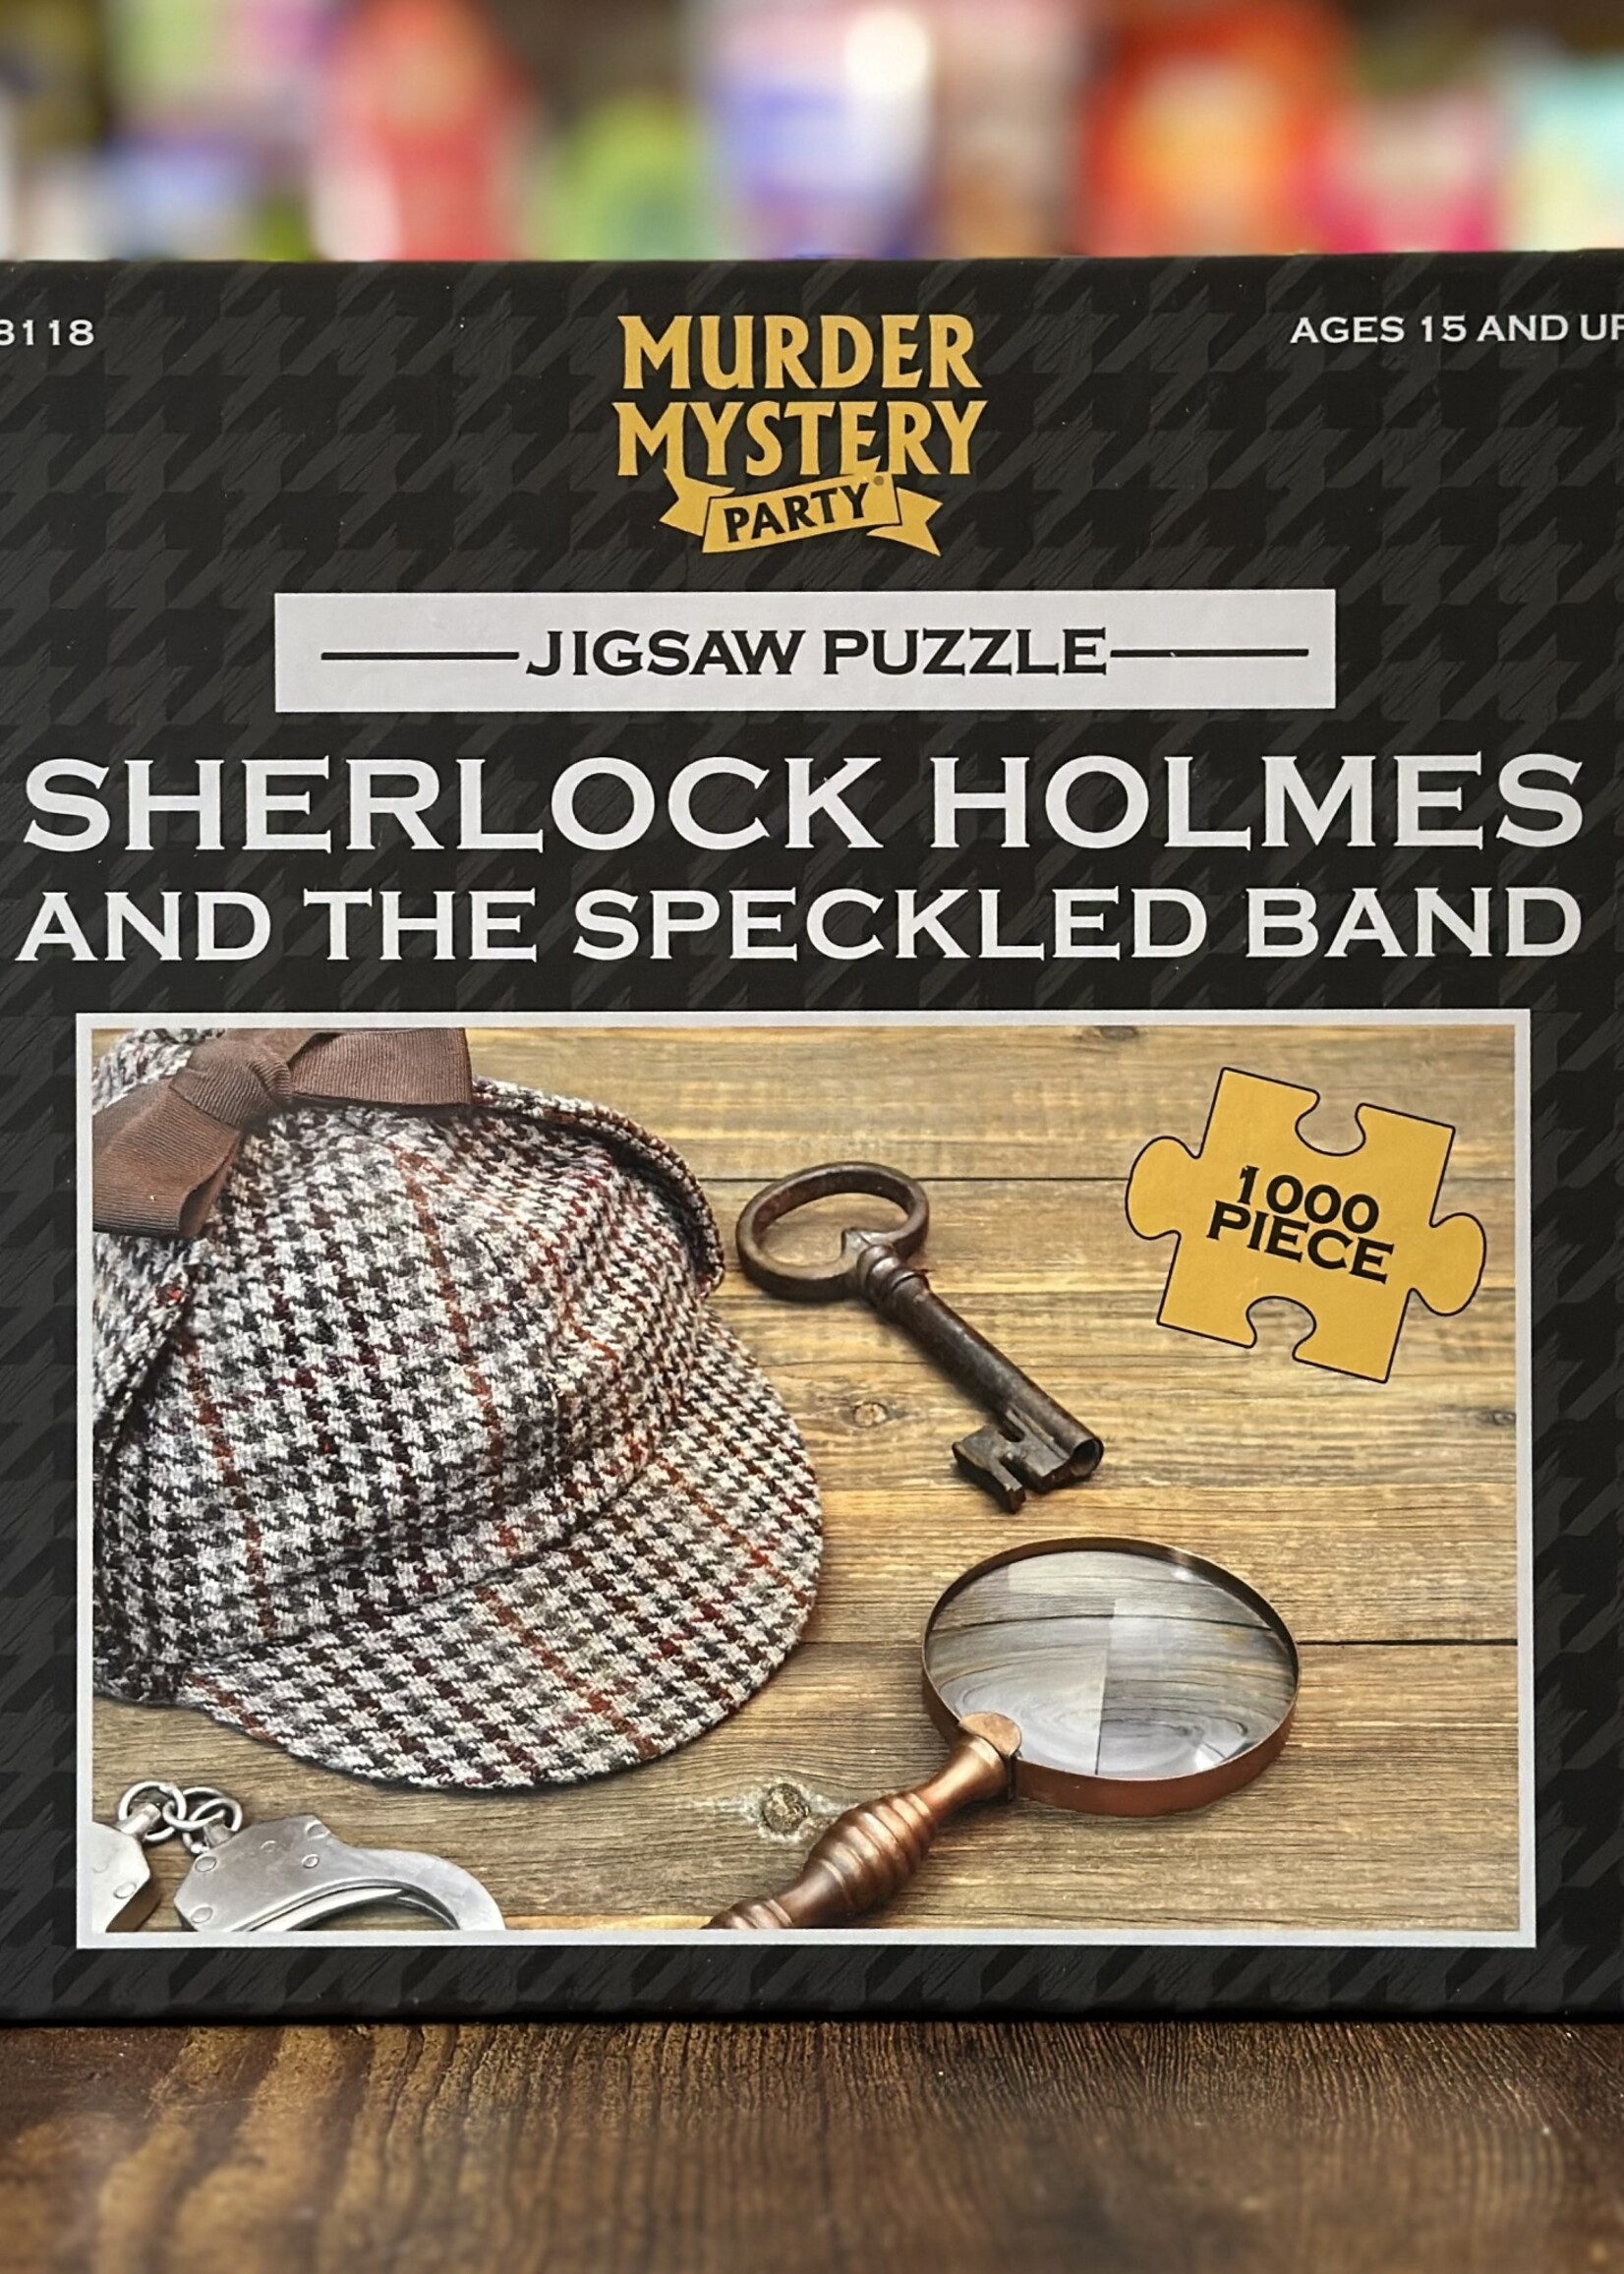 University Games Puzzle - Sherlock Homes and the Speckled Band (Murder Mystery Party) 1000 Pc.